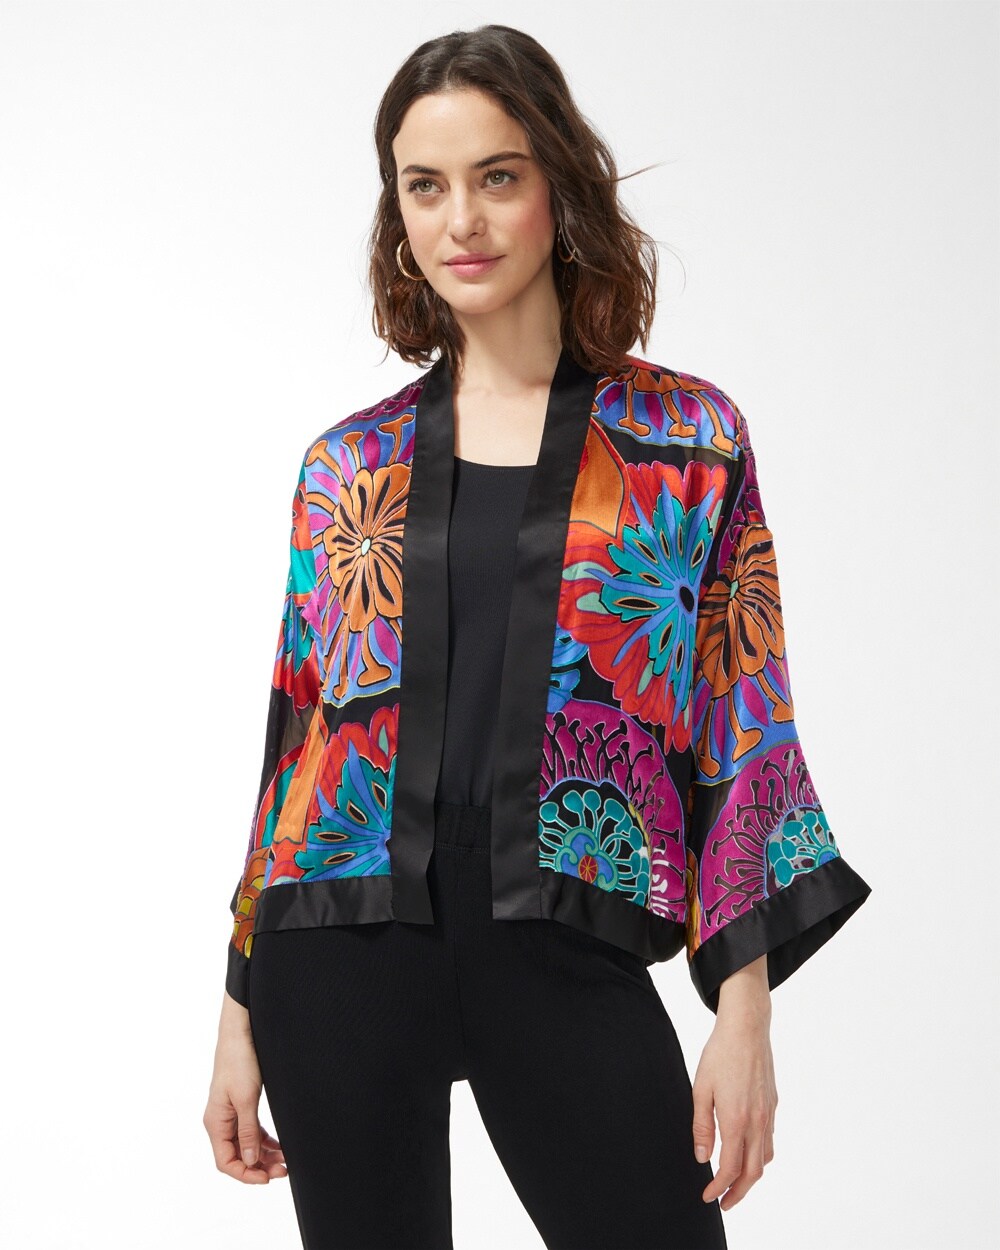 Travelers Collection Burnout Cropped Jacket video preview image, click to start video